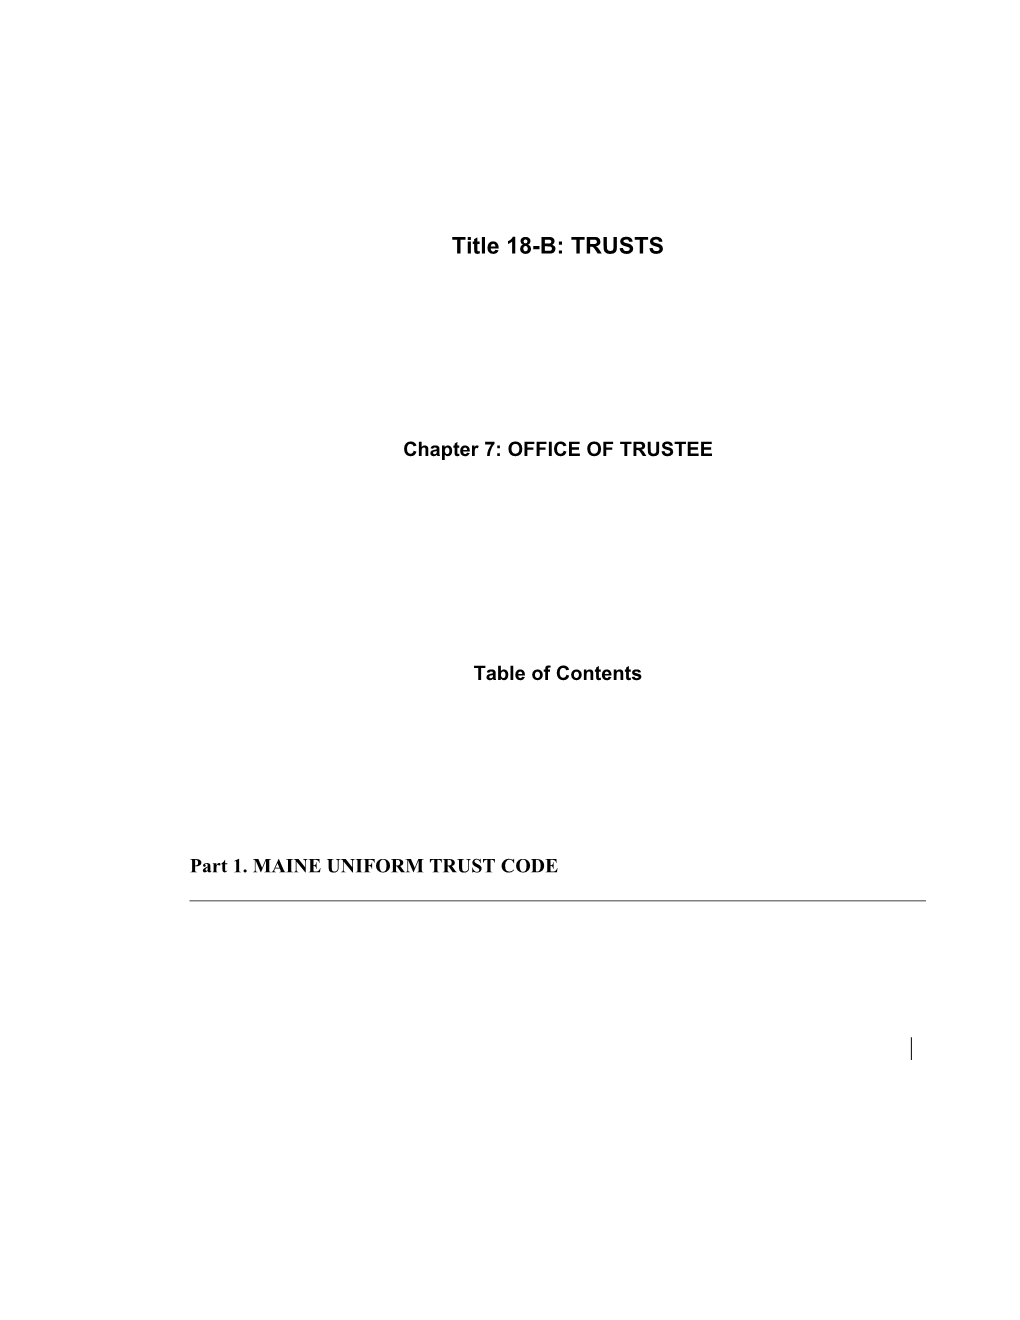 MRS Title 18-B, Chapter7: OFFICE of TRUSTEE